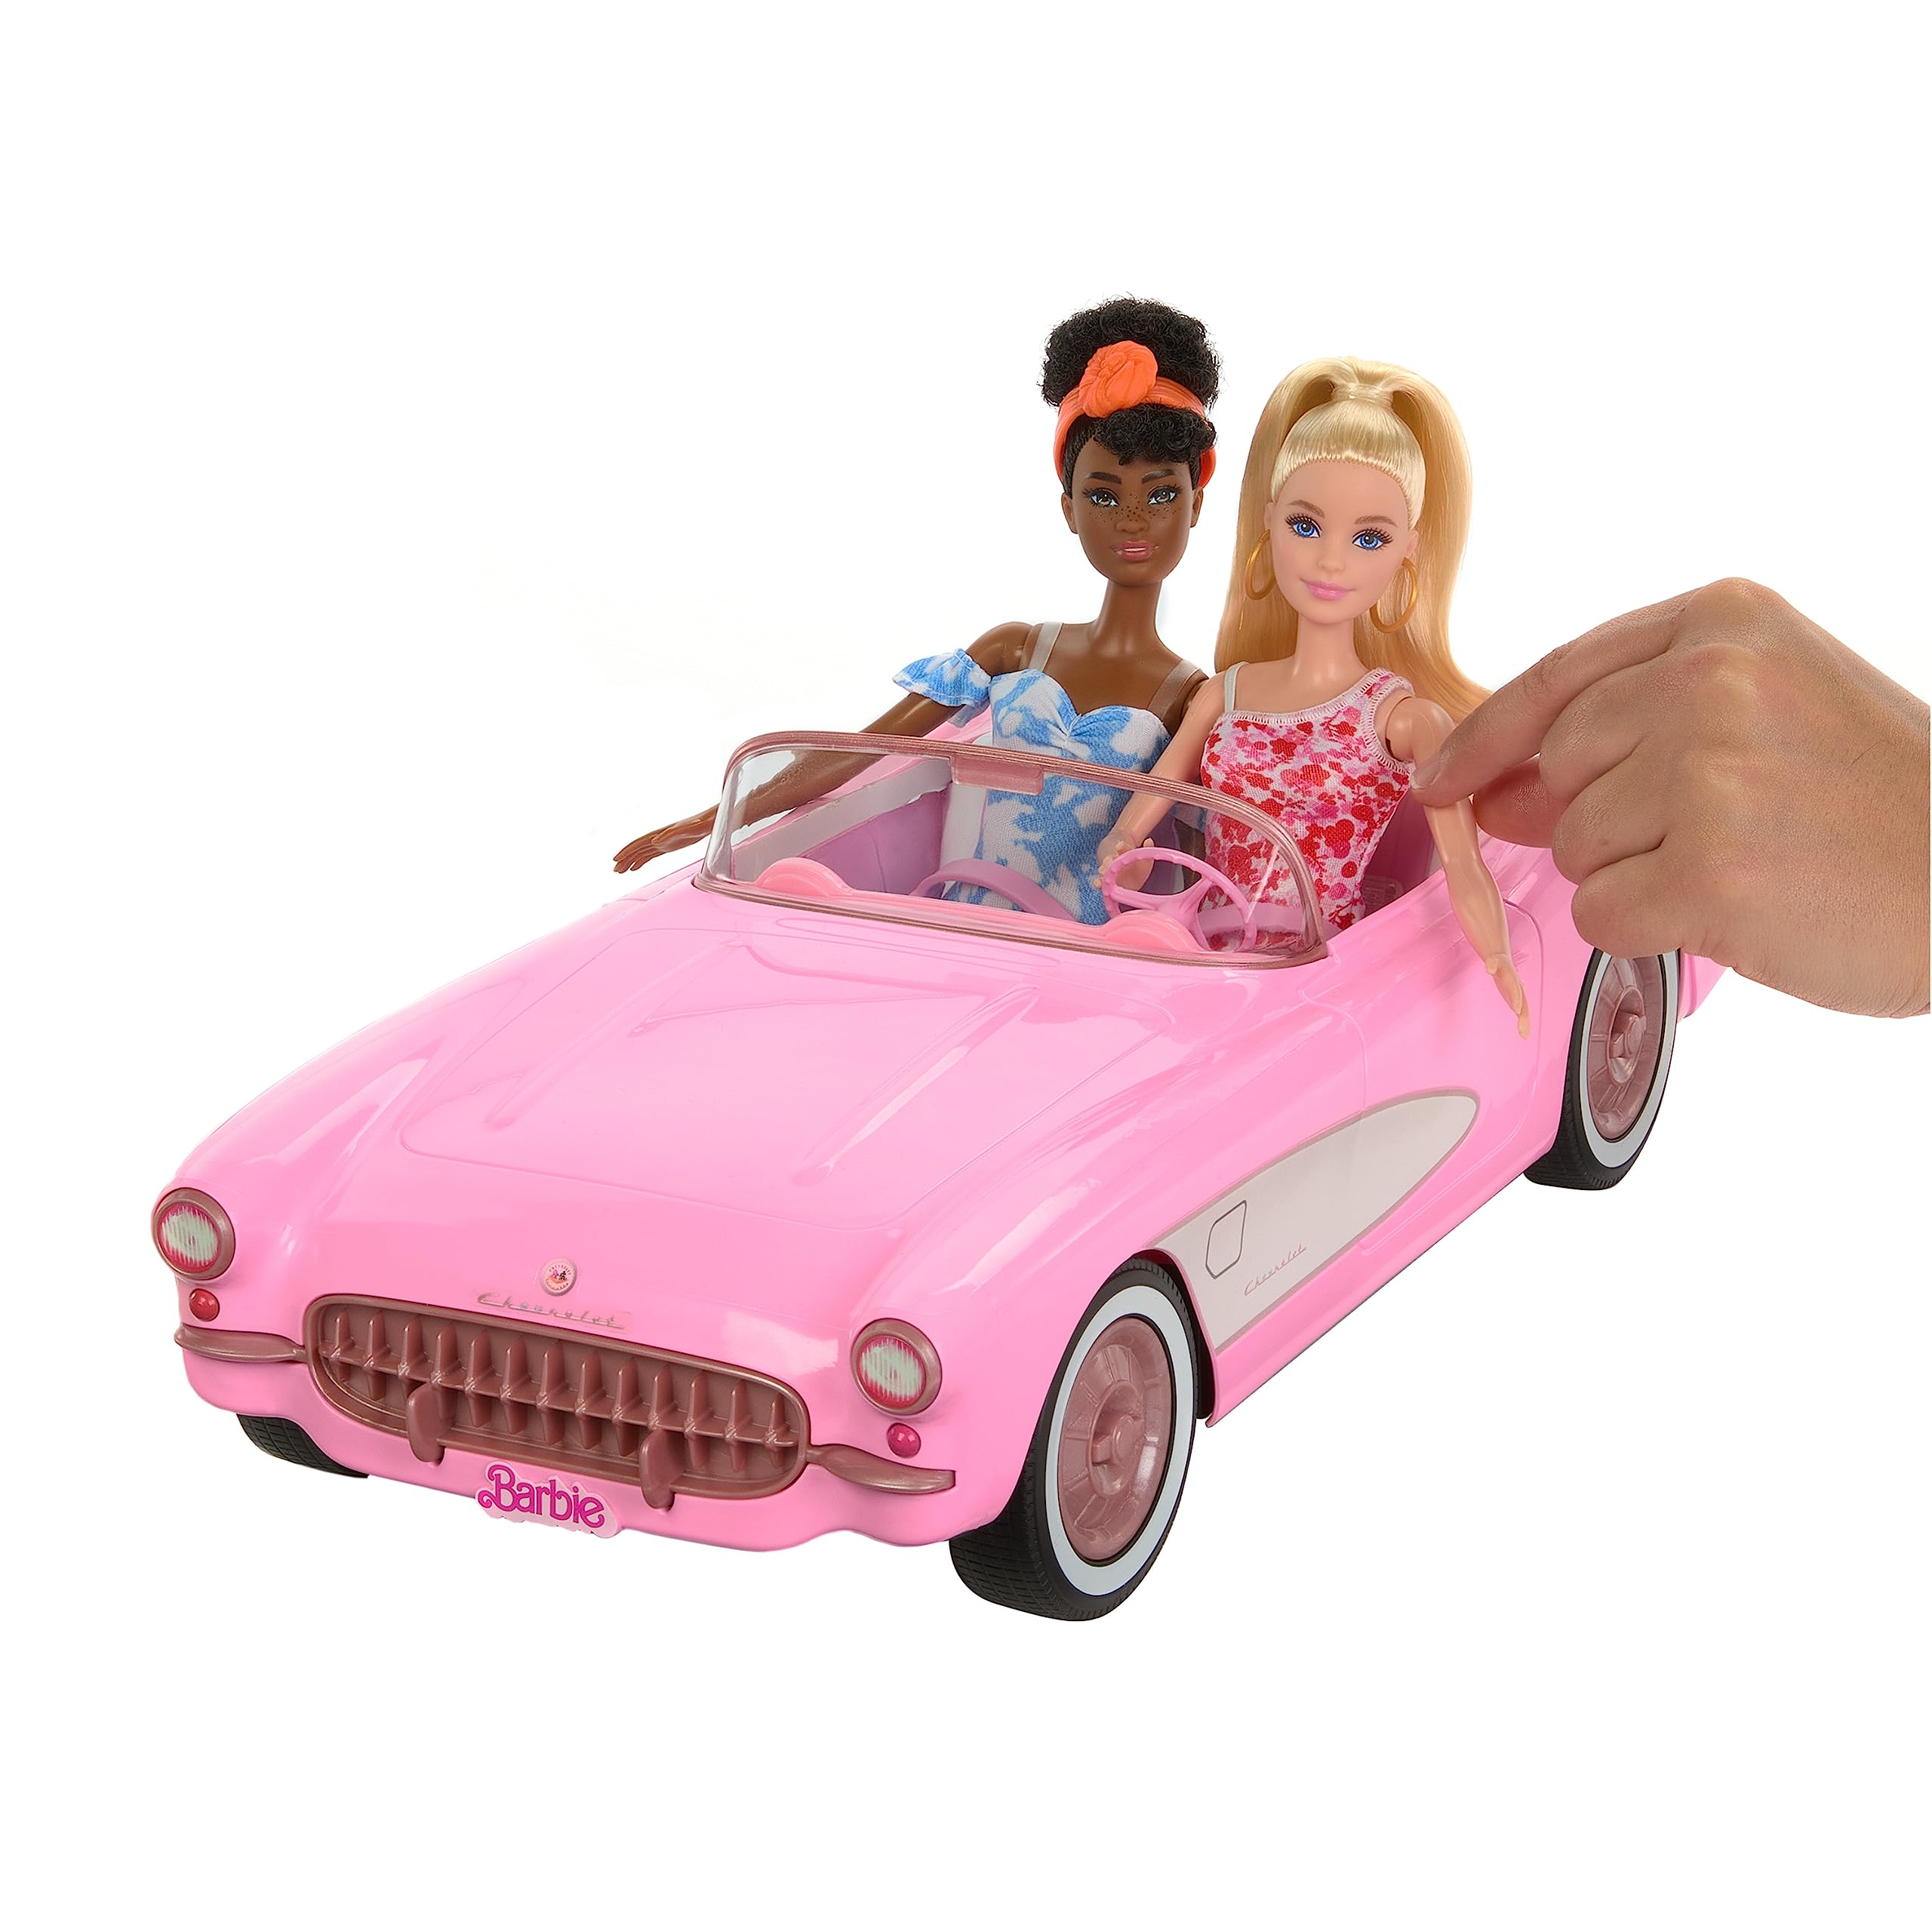 Hot Wheels RC Barbie Corvette, Battery-Operated Remote-Control Toy Car from Barbie The Movie, Holds 2 Barbie Dolls, Trunk Opens for Storage